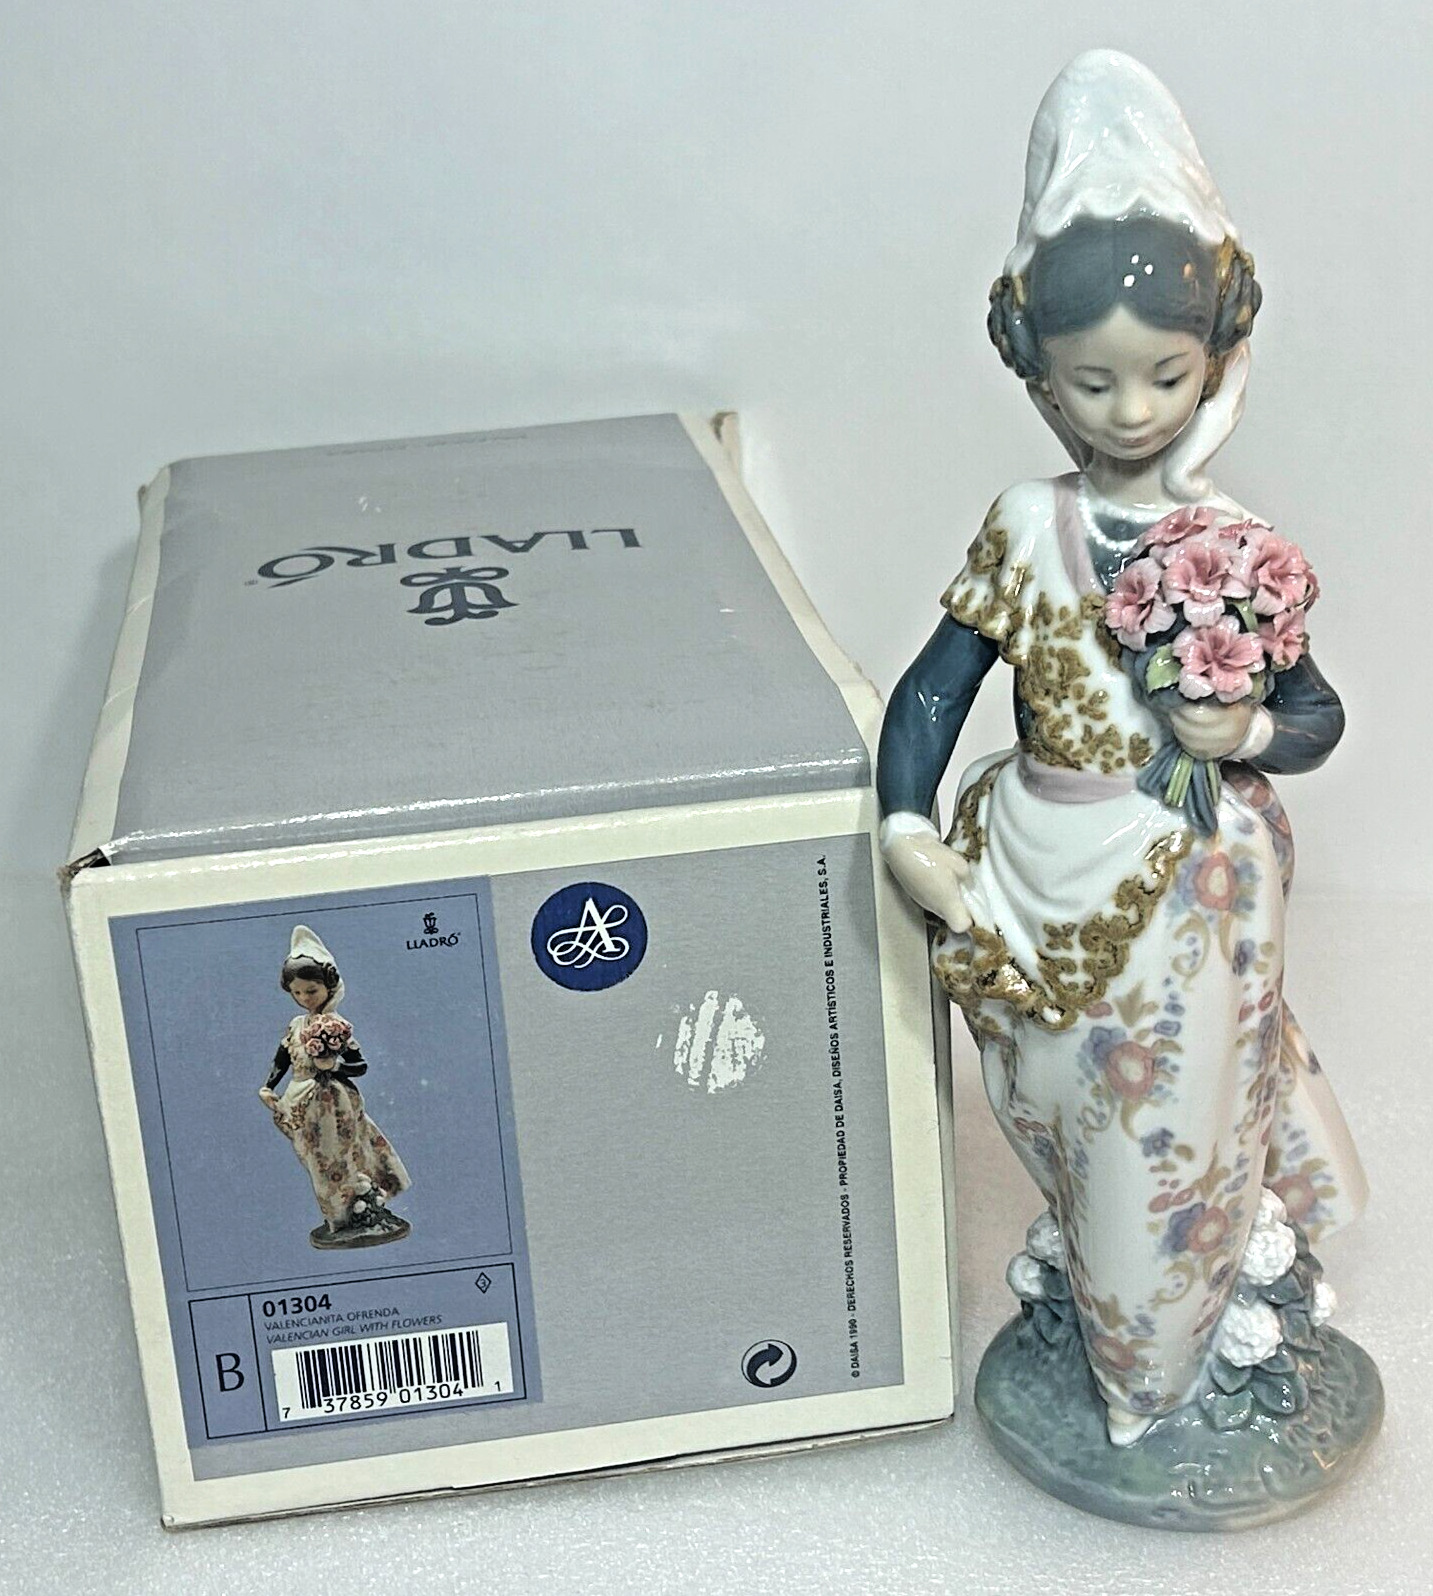 Lladro Figurine 1304 Valencian Girl with Flowers / with Original Box - RETIRED